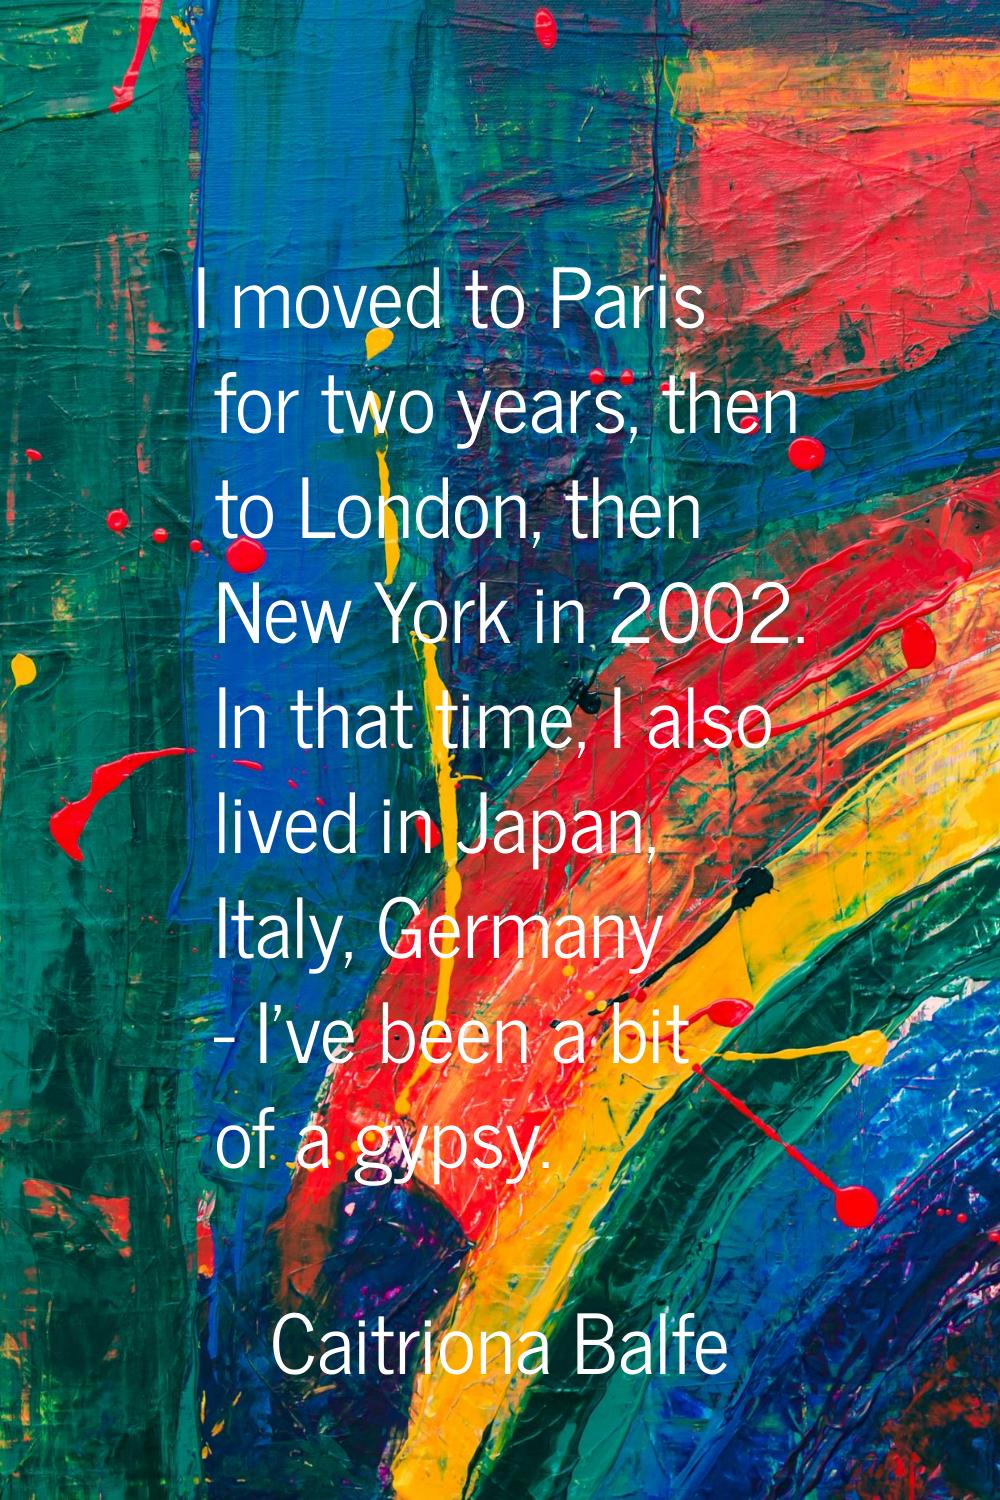 I moved to Paris for two years, then to London, then New York in 2002. In that time, I also lived i